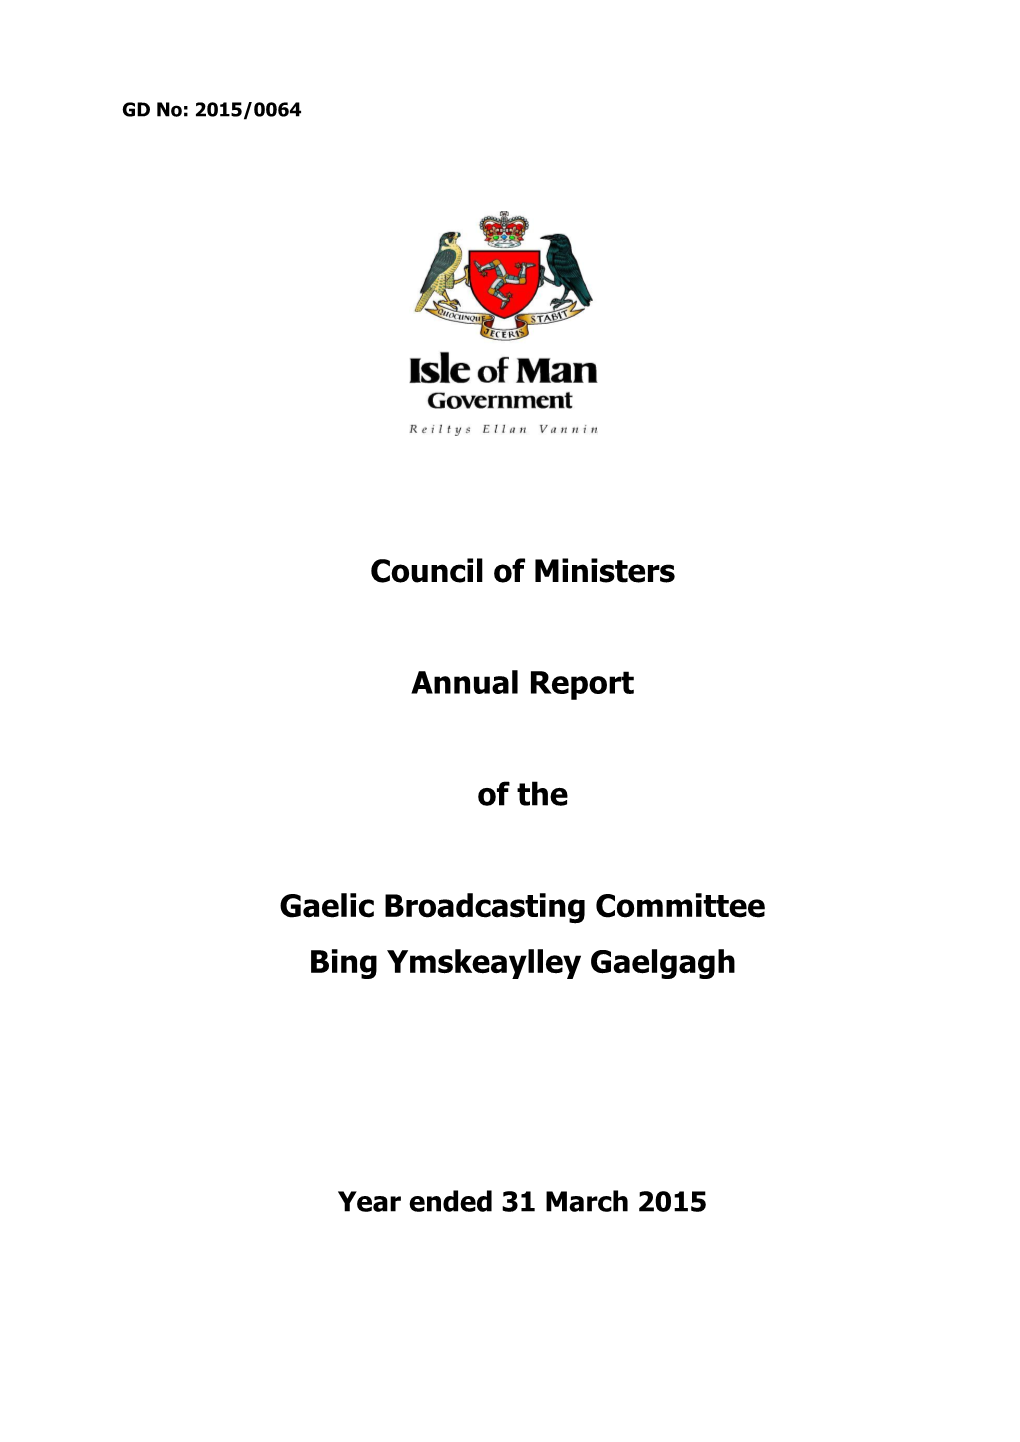 Council of Ministers Annual Report of the Gaelic Broadcasting Committee